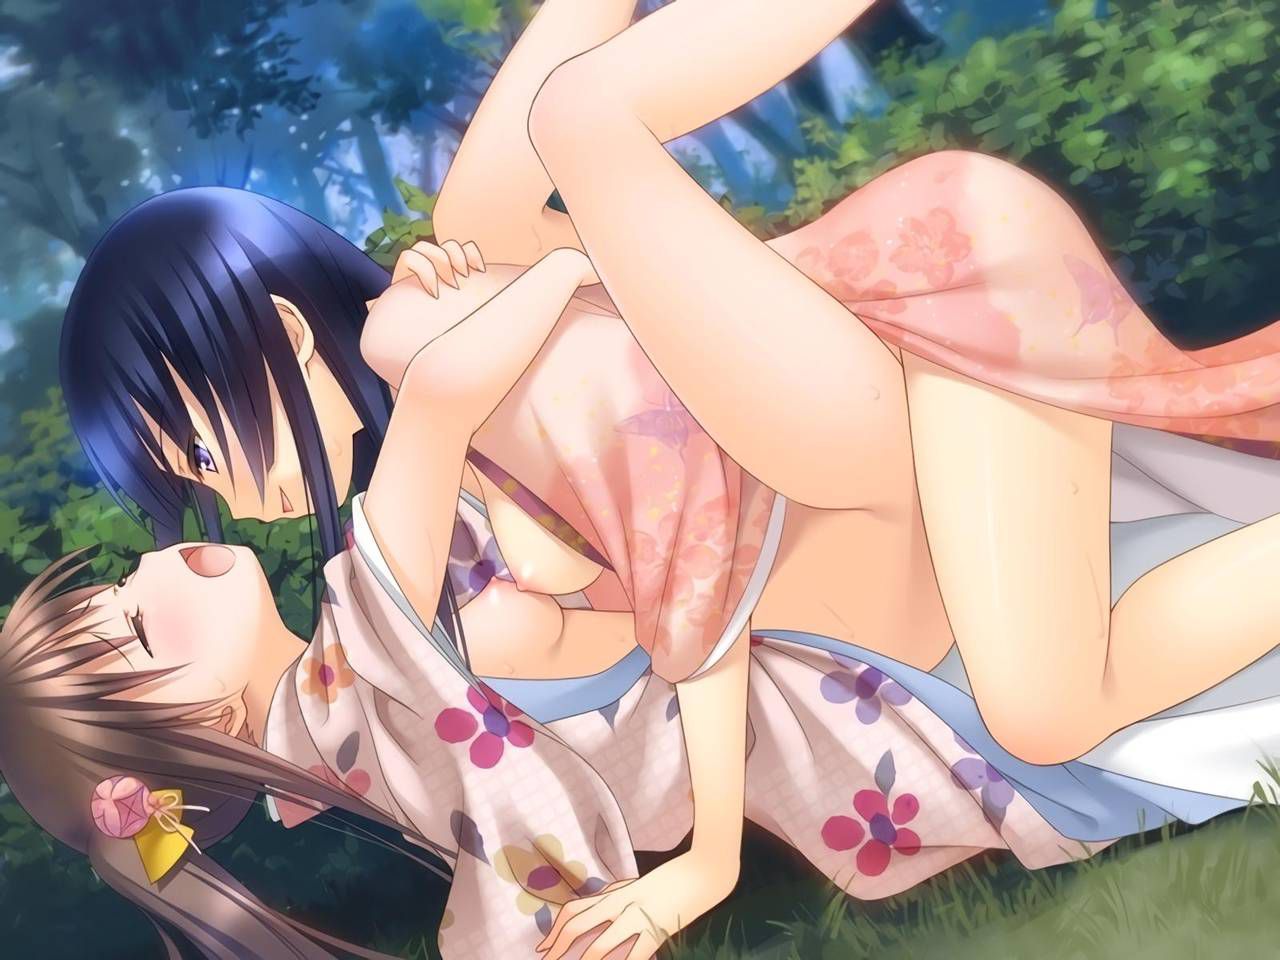 [2nd] The second erotic image that has been entwined violently between beautiful girl 34 [yuri/lesbian] 9